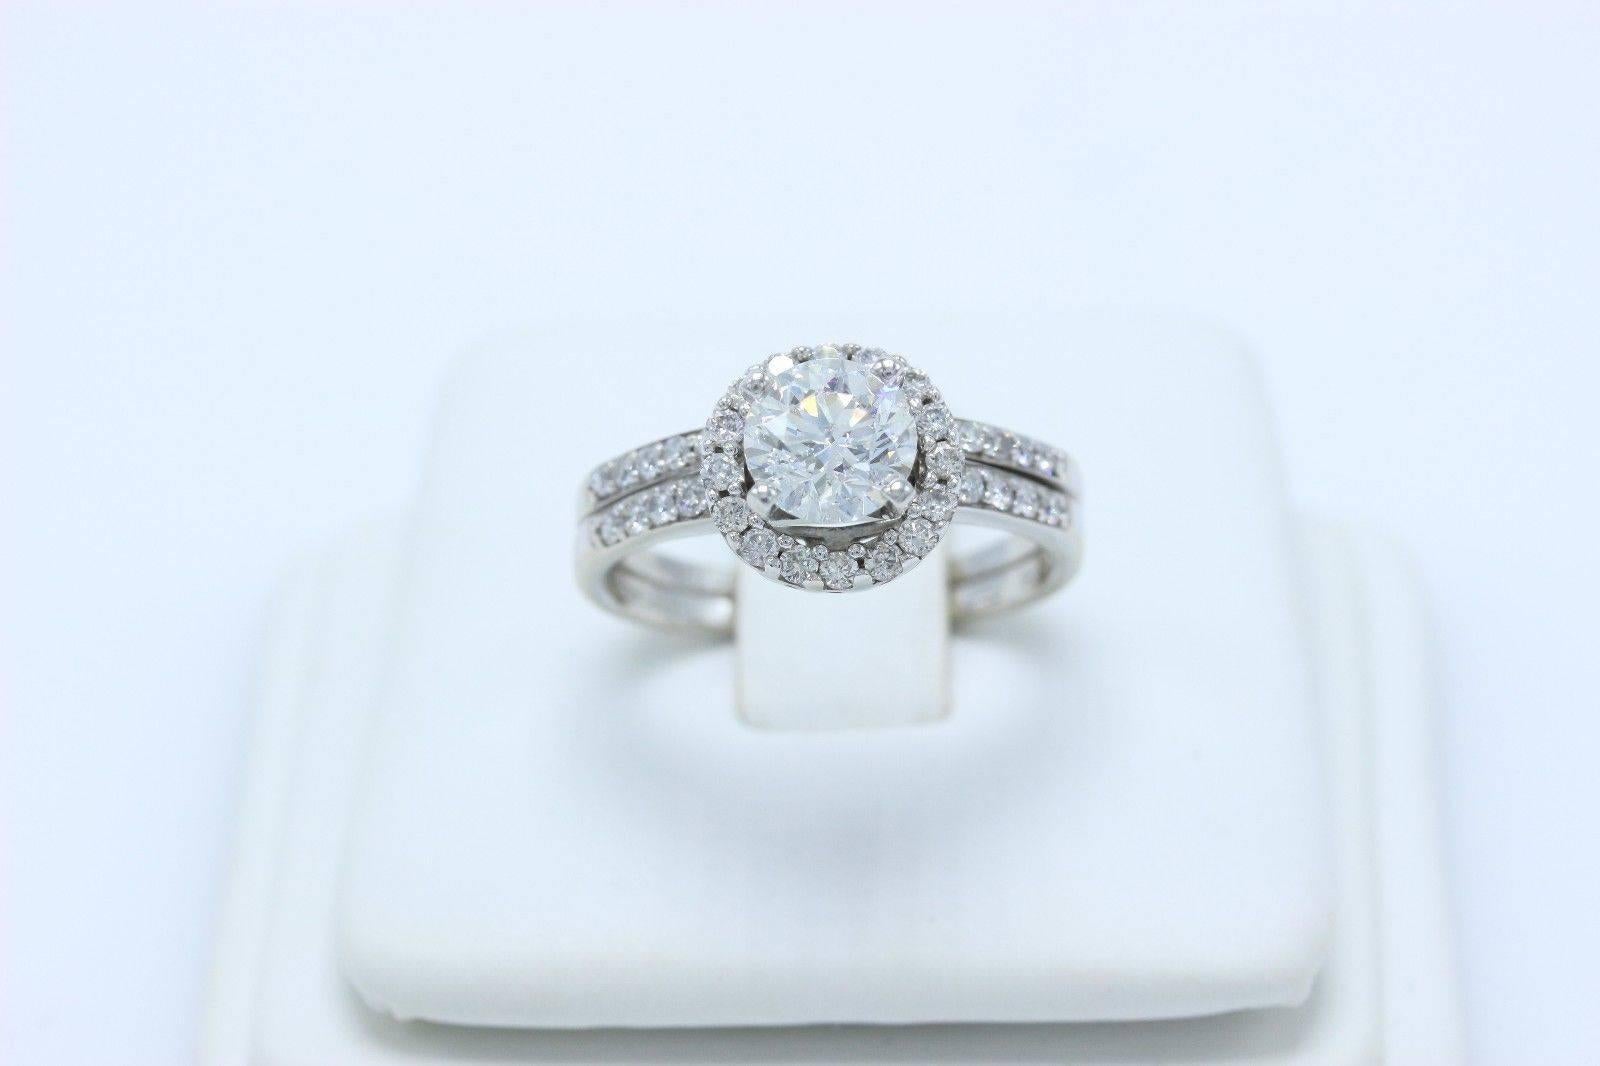 Tolkowsky Ideal Cut Round 1.54 Carat Diamond Band Ring in 14 Karat White Gold In Excellent Condition For Sale In San Diego, CA